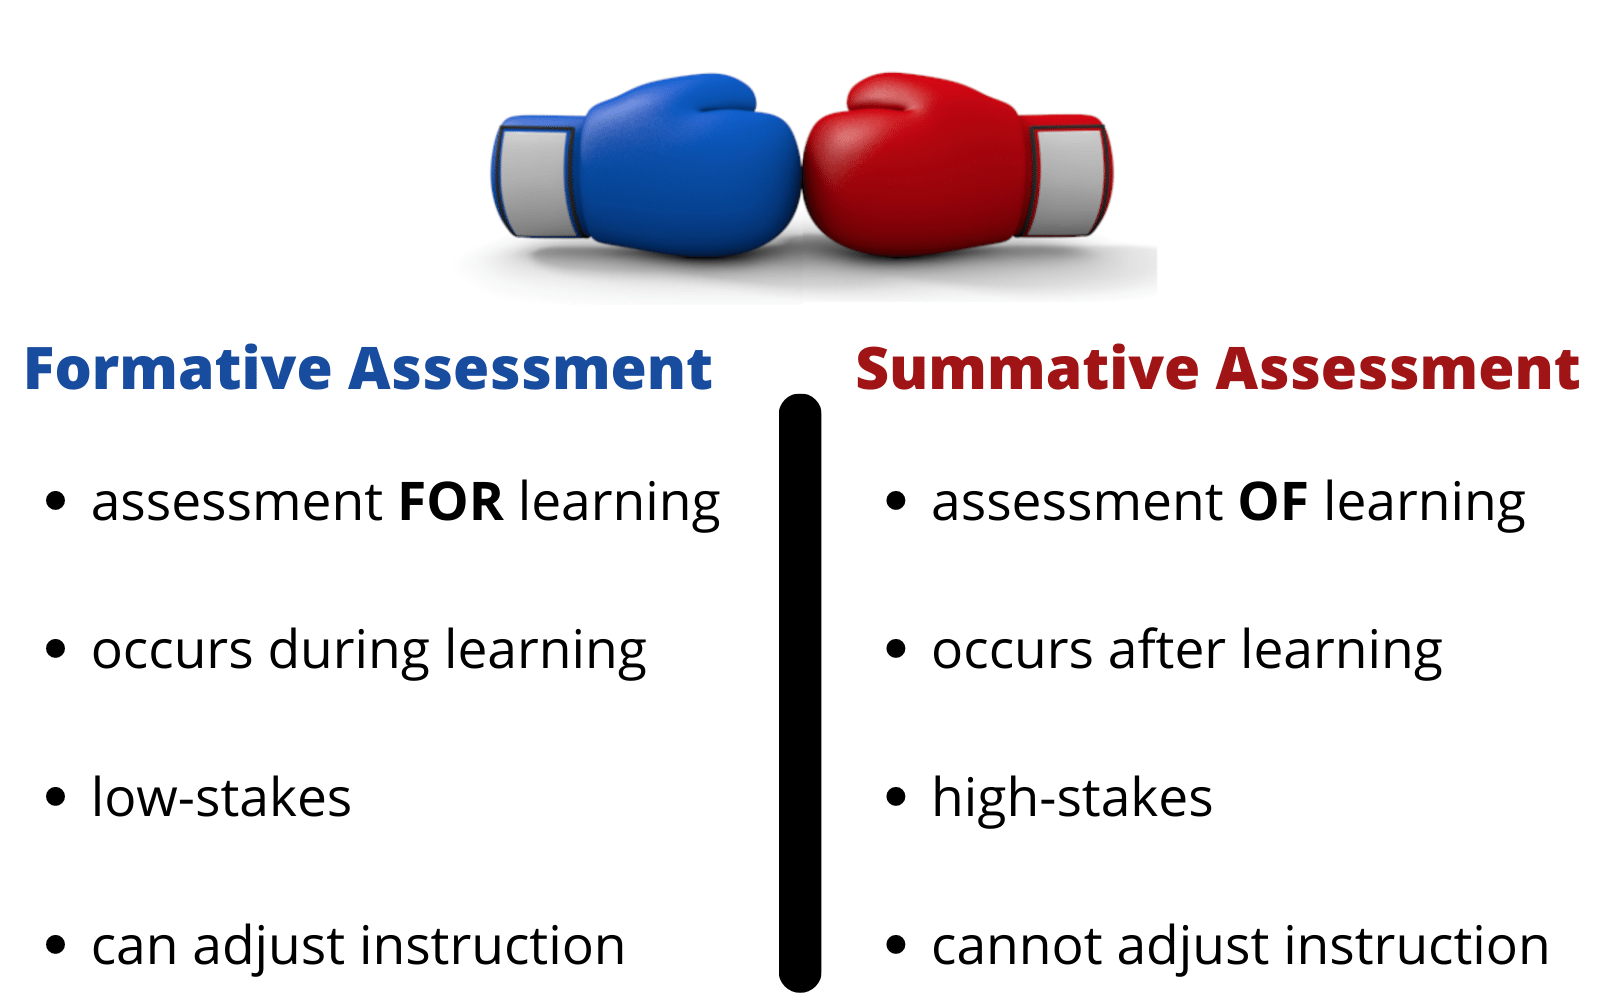 clipart of two boxing gloves touching at the top; below are 2 columns with bullet points; the left column is titles fornative assessment and has bullet points that read assessment for learning, done during learning, low-stkaes, and can adjust instruction; the right column is titled summative assessment and includes bullet points that read assessment of learning, occurs after learning, high-stakes, and cannot adjust instruction